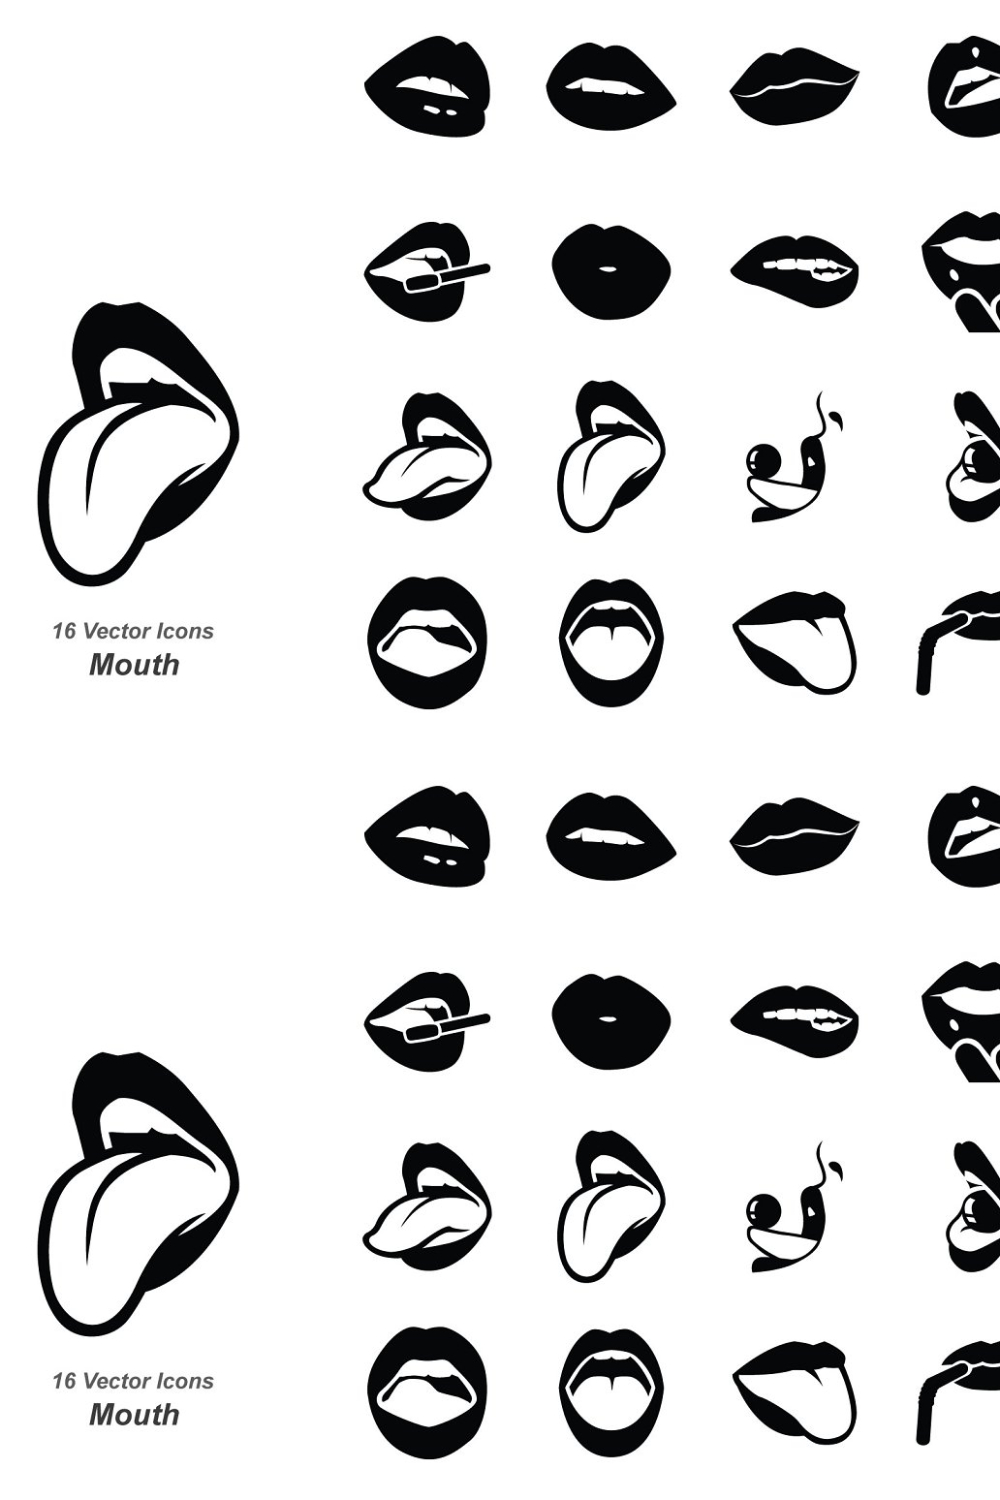 Mouth Vector Icons - Pinterest.